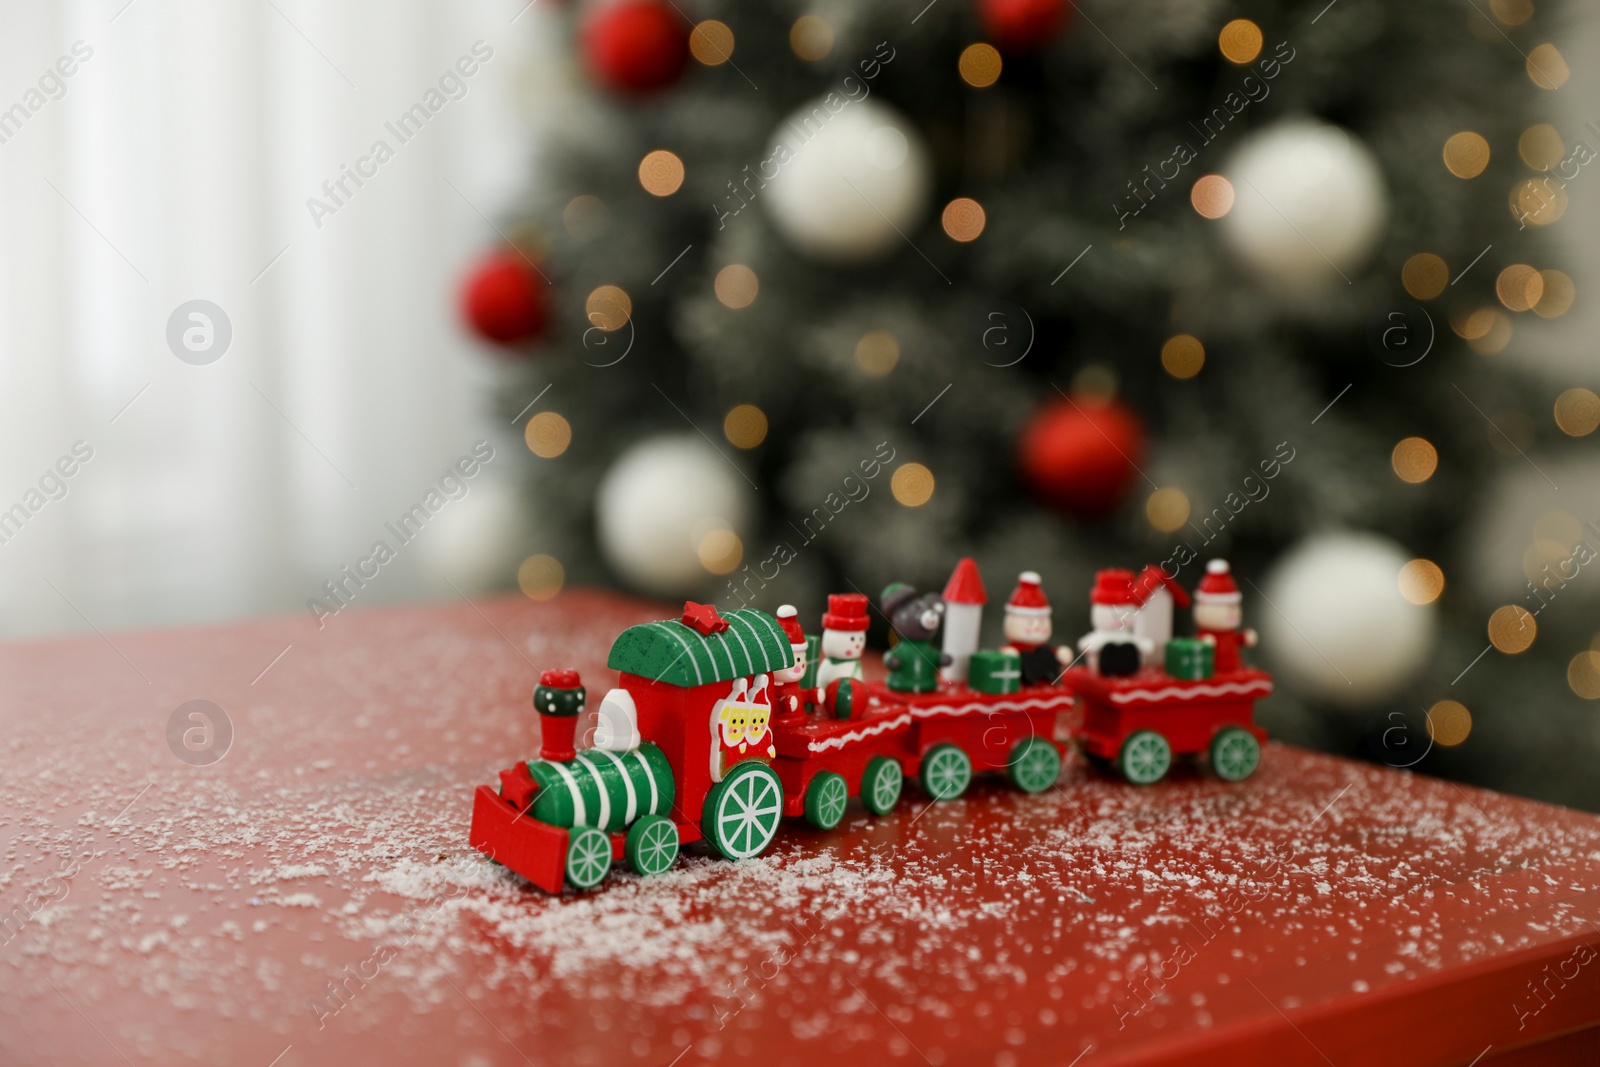 Photo of Bright toy train on table in room with Christmas tree